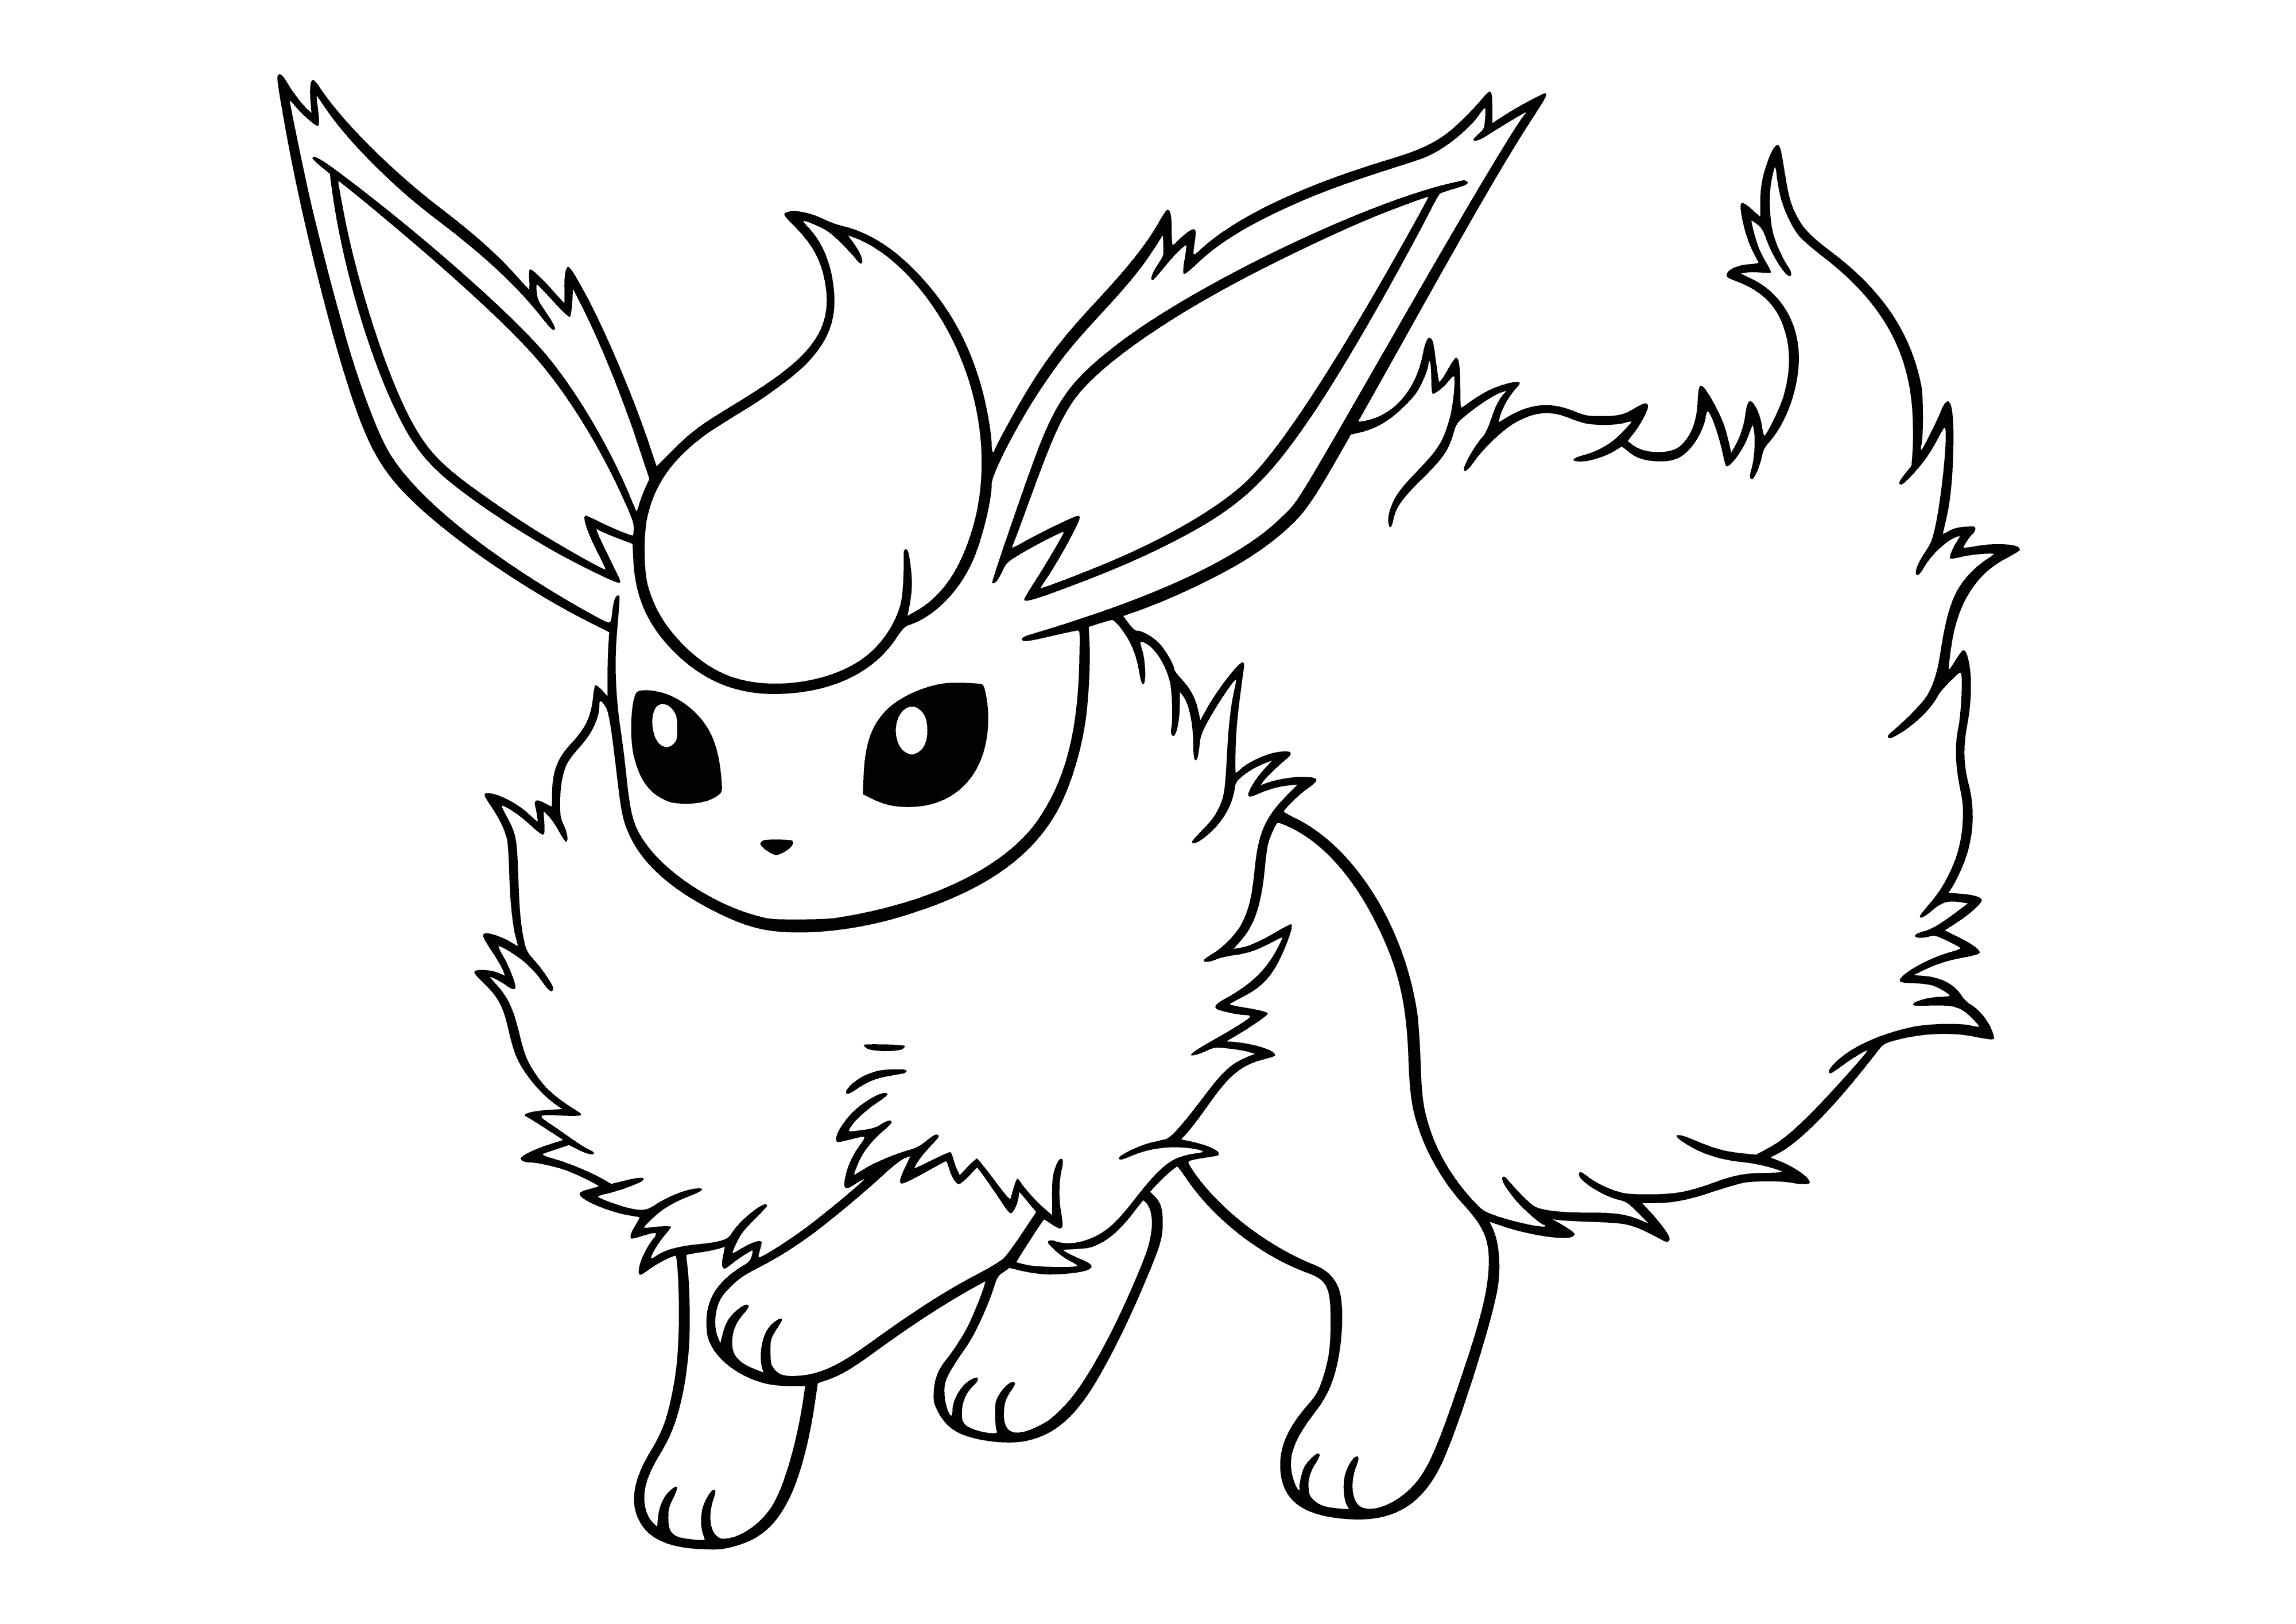 coloring page: A Fire type Pokémon, Flareon, evolves from Eevee when exposed to a Fire Stone. Download a coloring page of it!